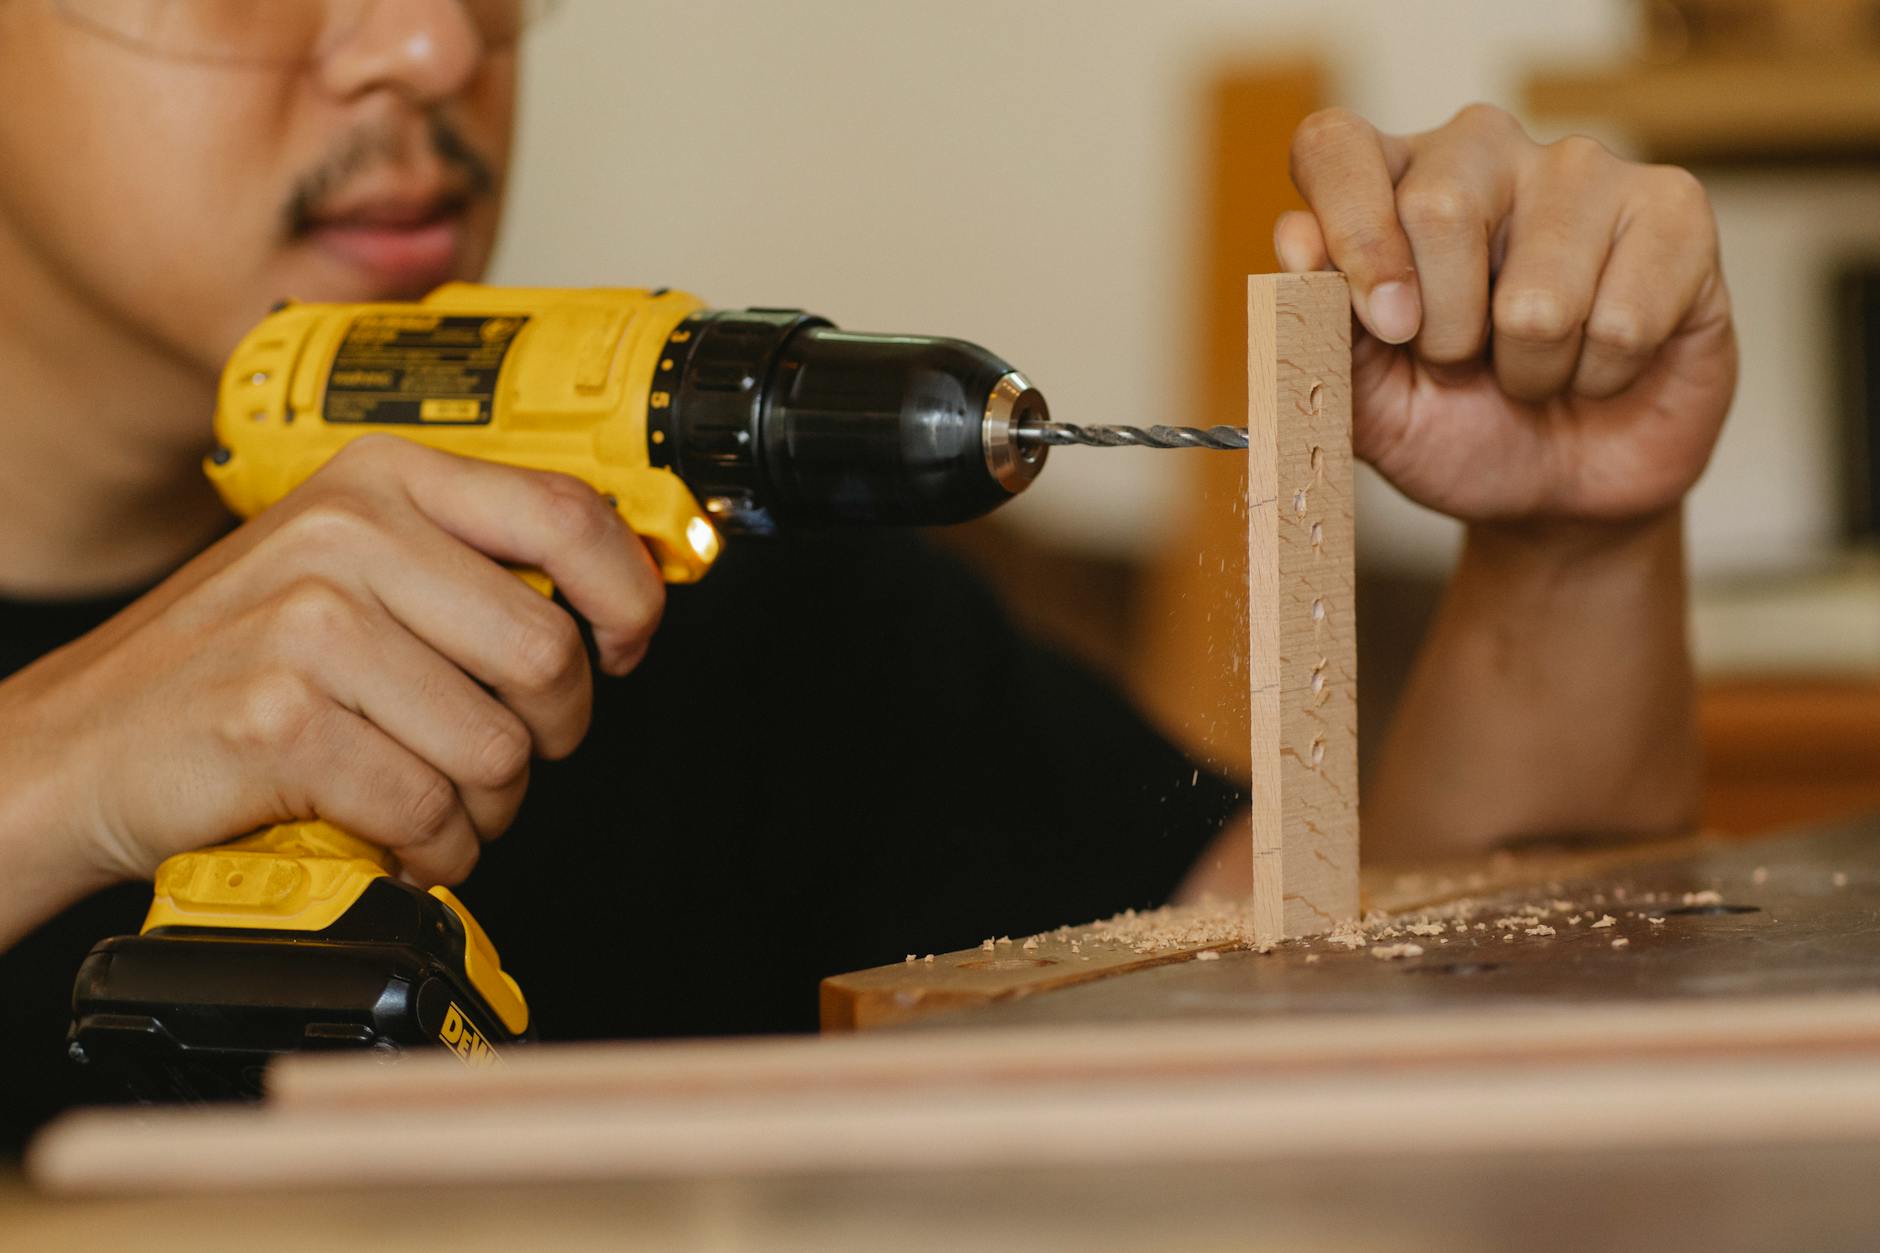 Hand and Power Tool Safety: Proper Use and Inspection